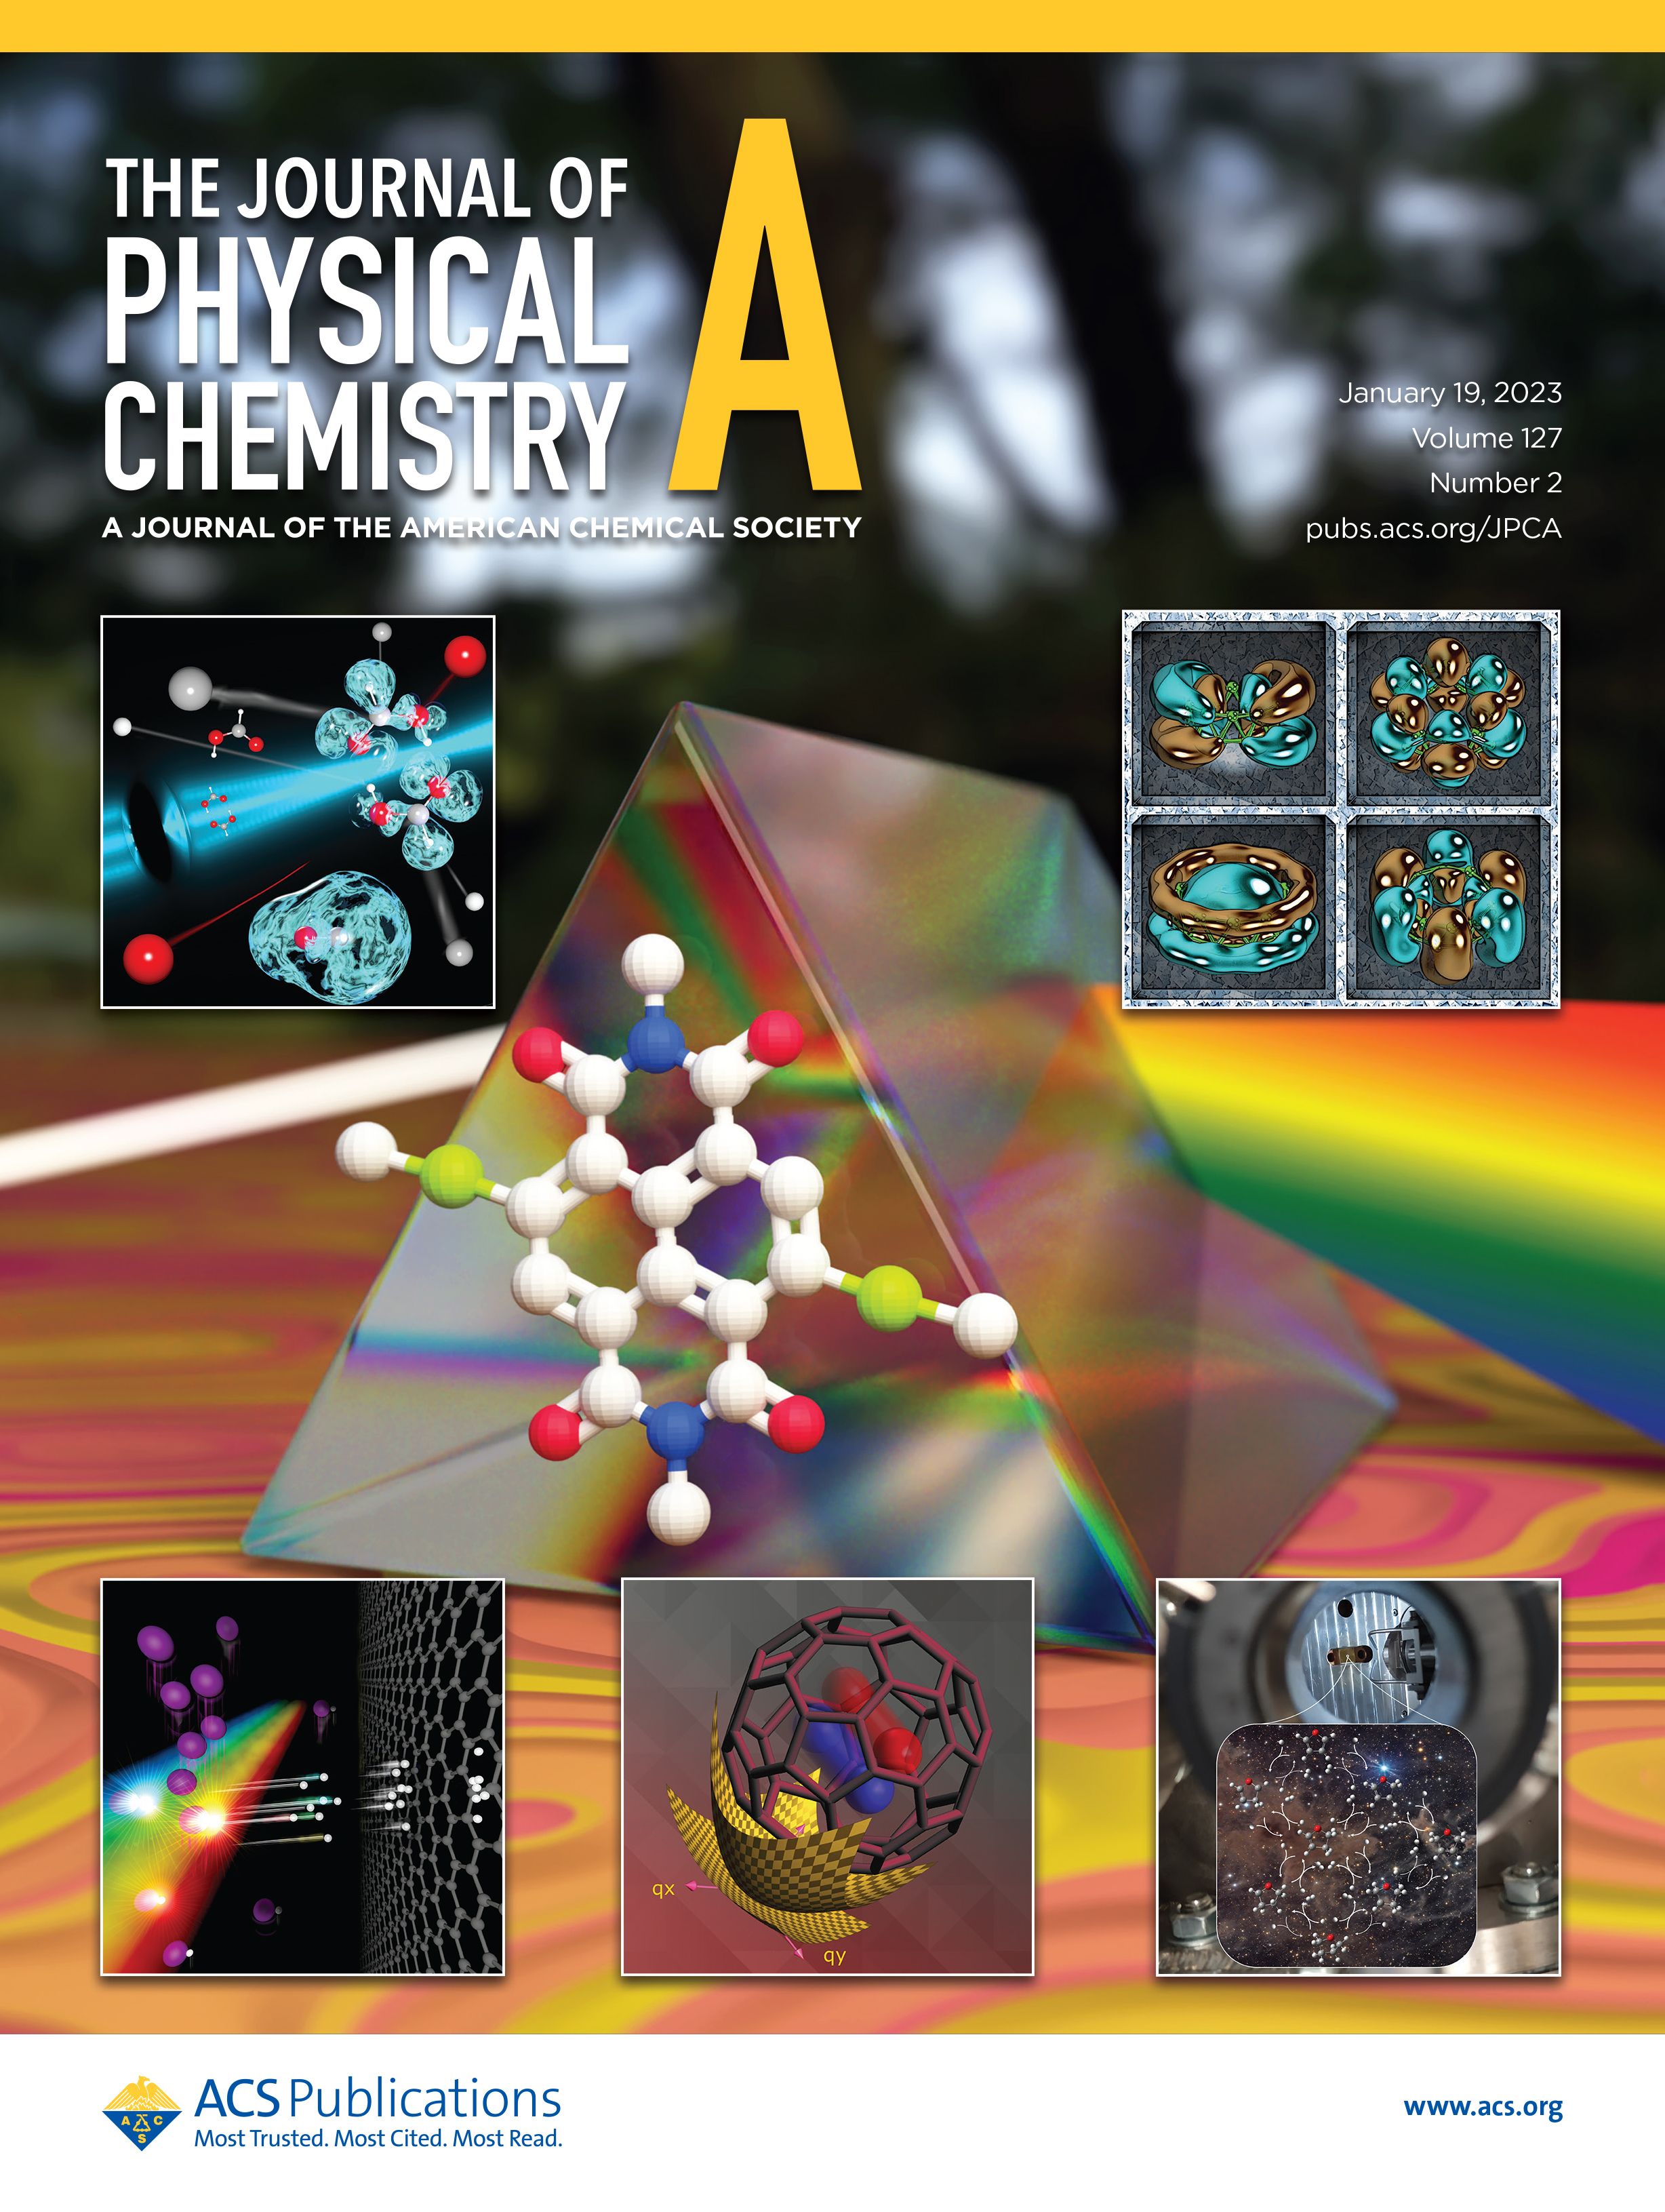 The Journal of Physical Chemistry A journal covers